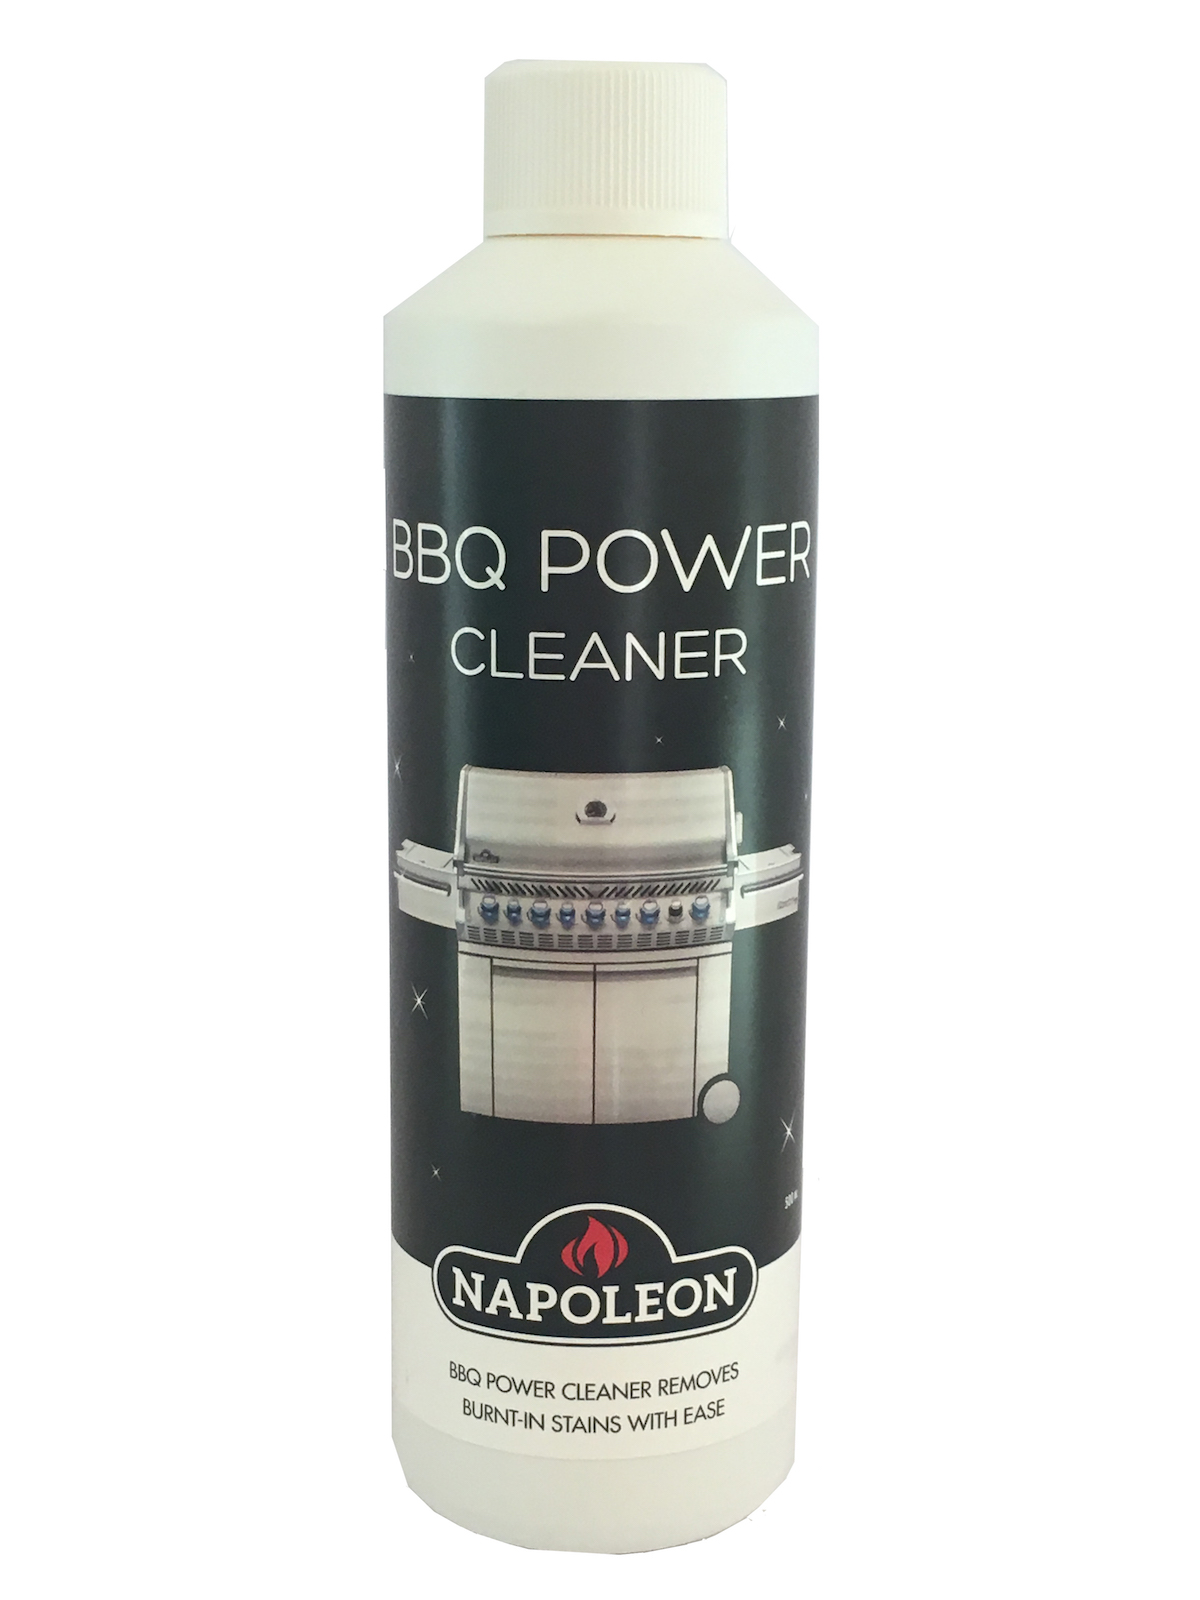 NAPOLEON Grill Power Cleaner